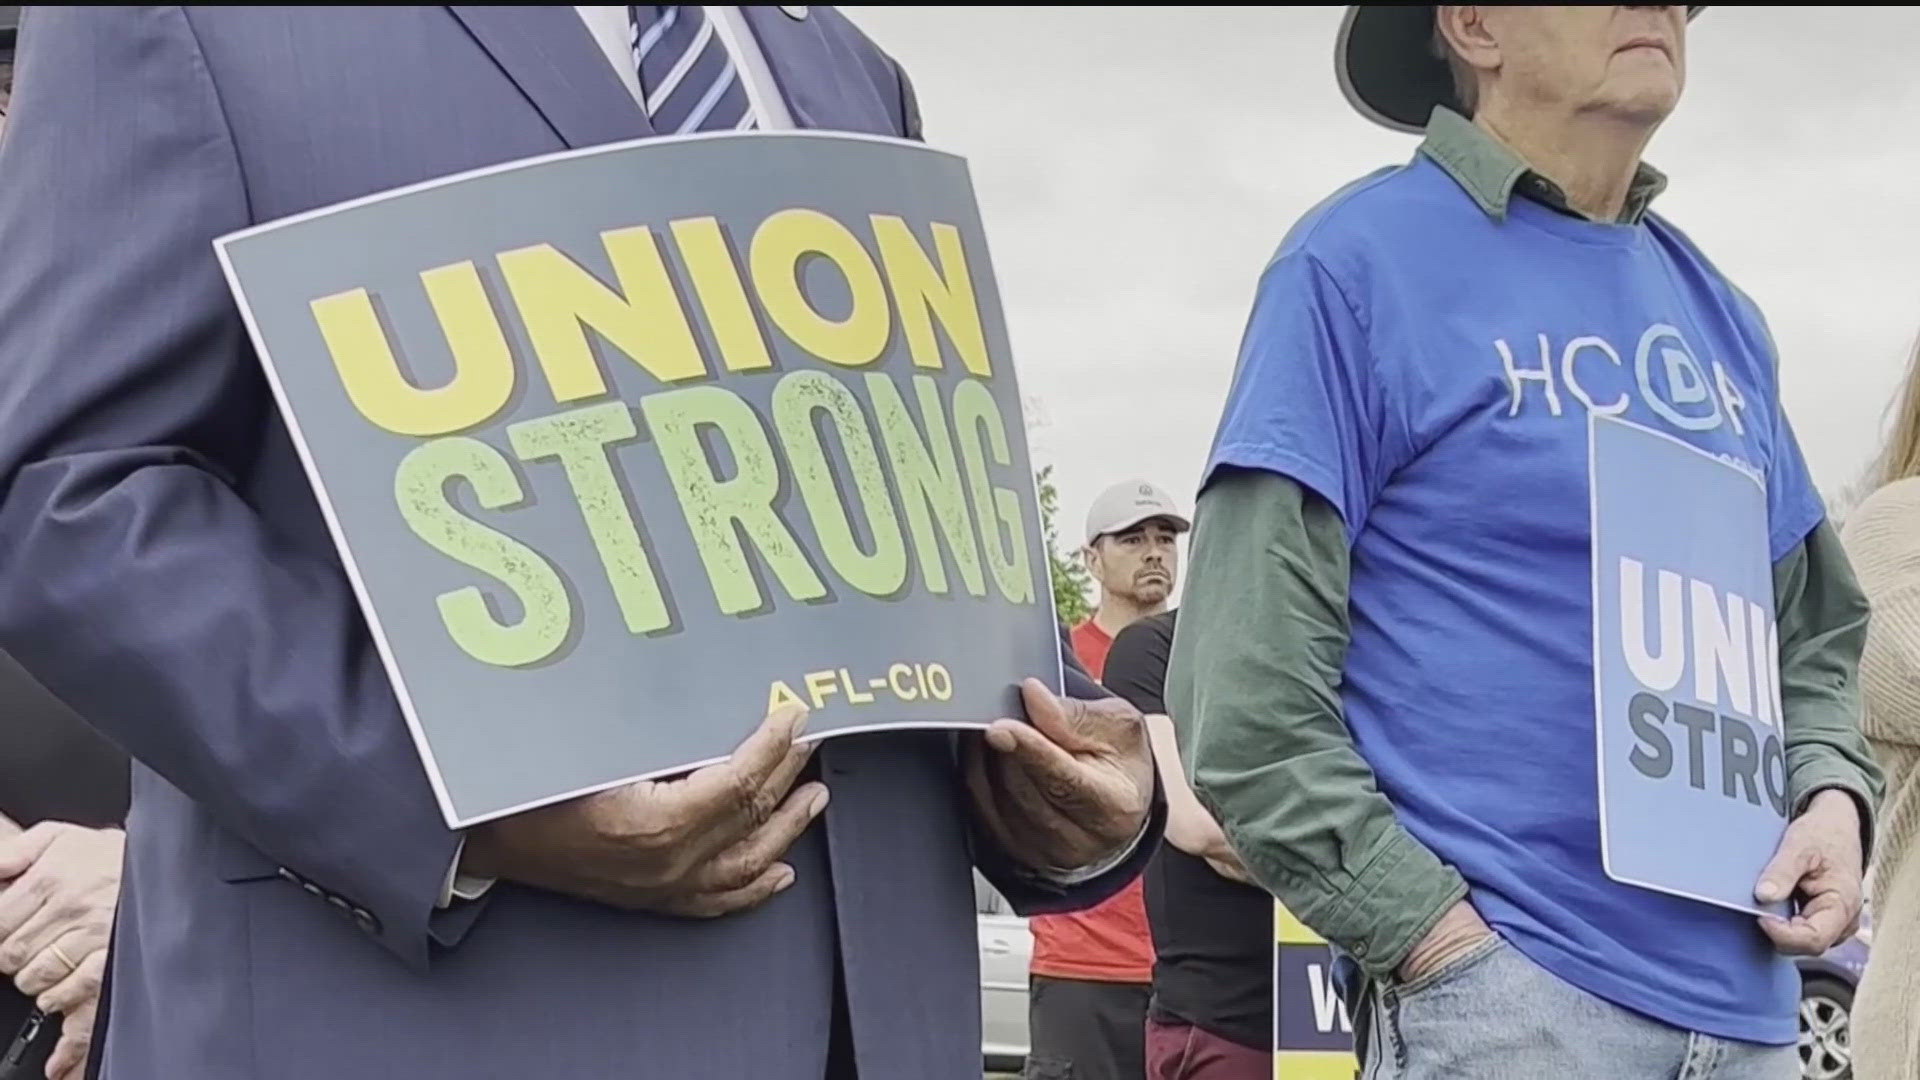 Despite Kemp signing a bill restricting how some companies could unionize, organized labor in Georgia says unions are trending upward.